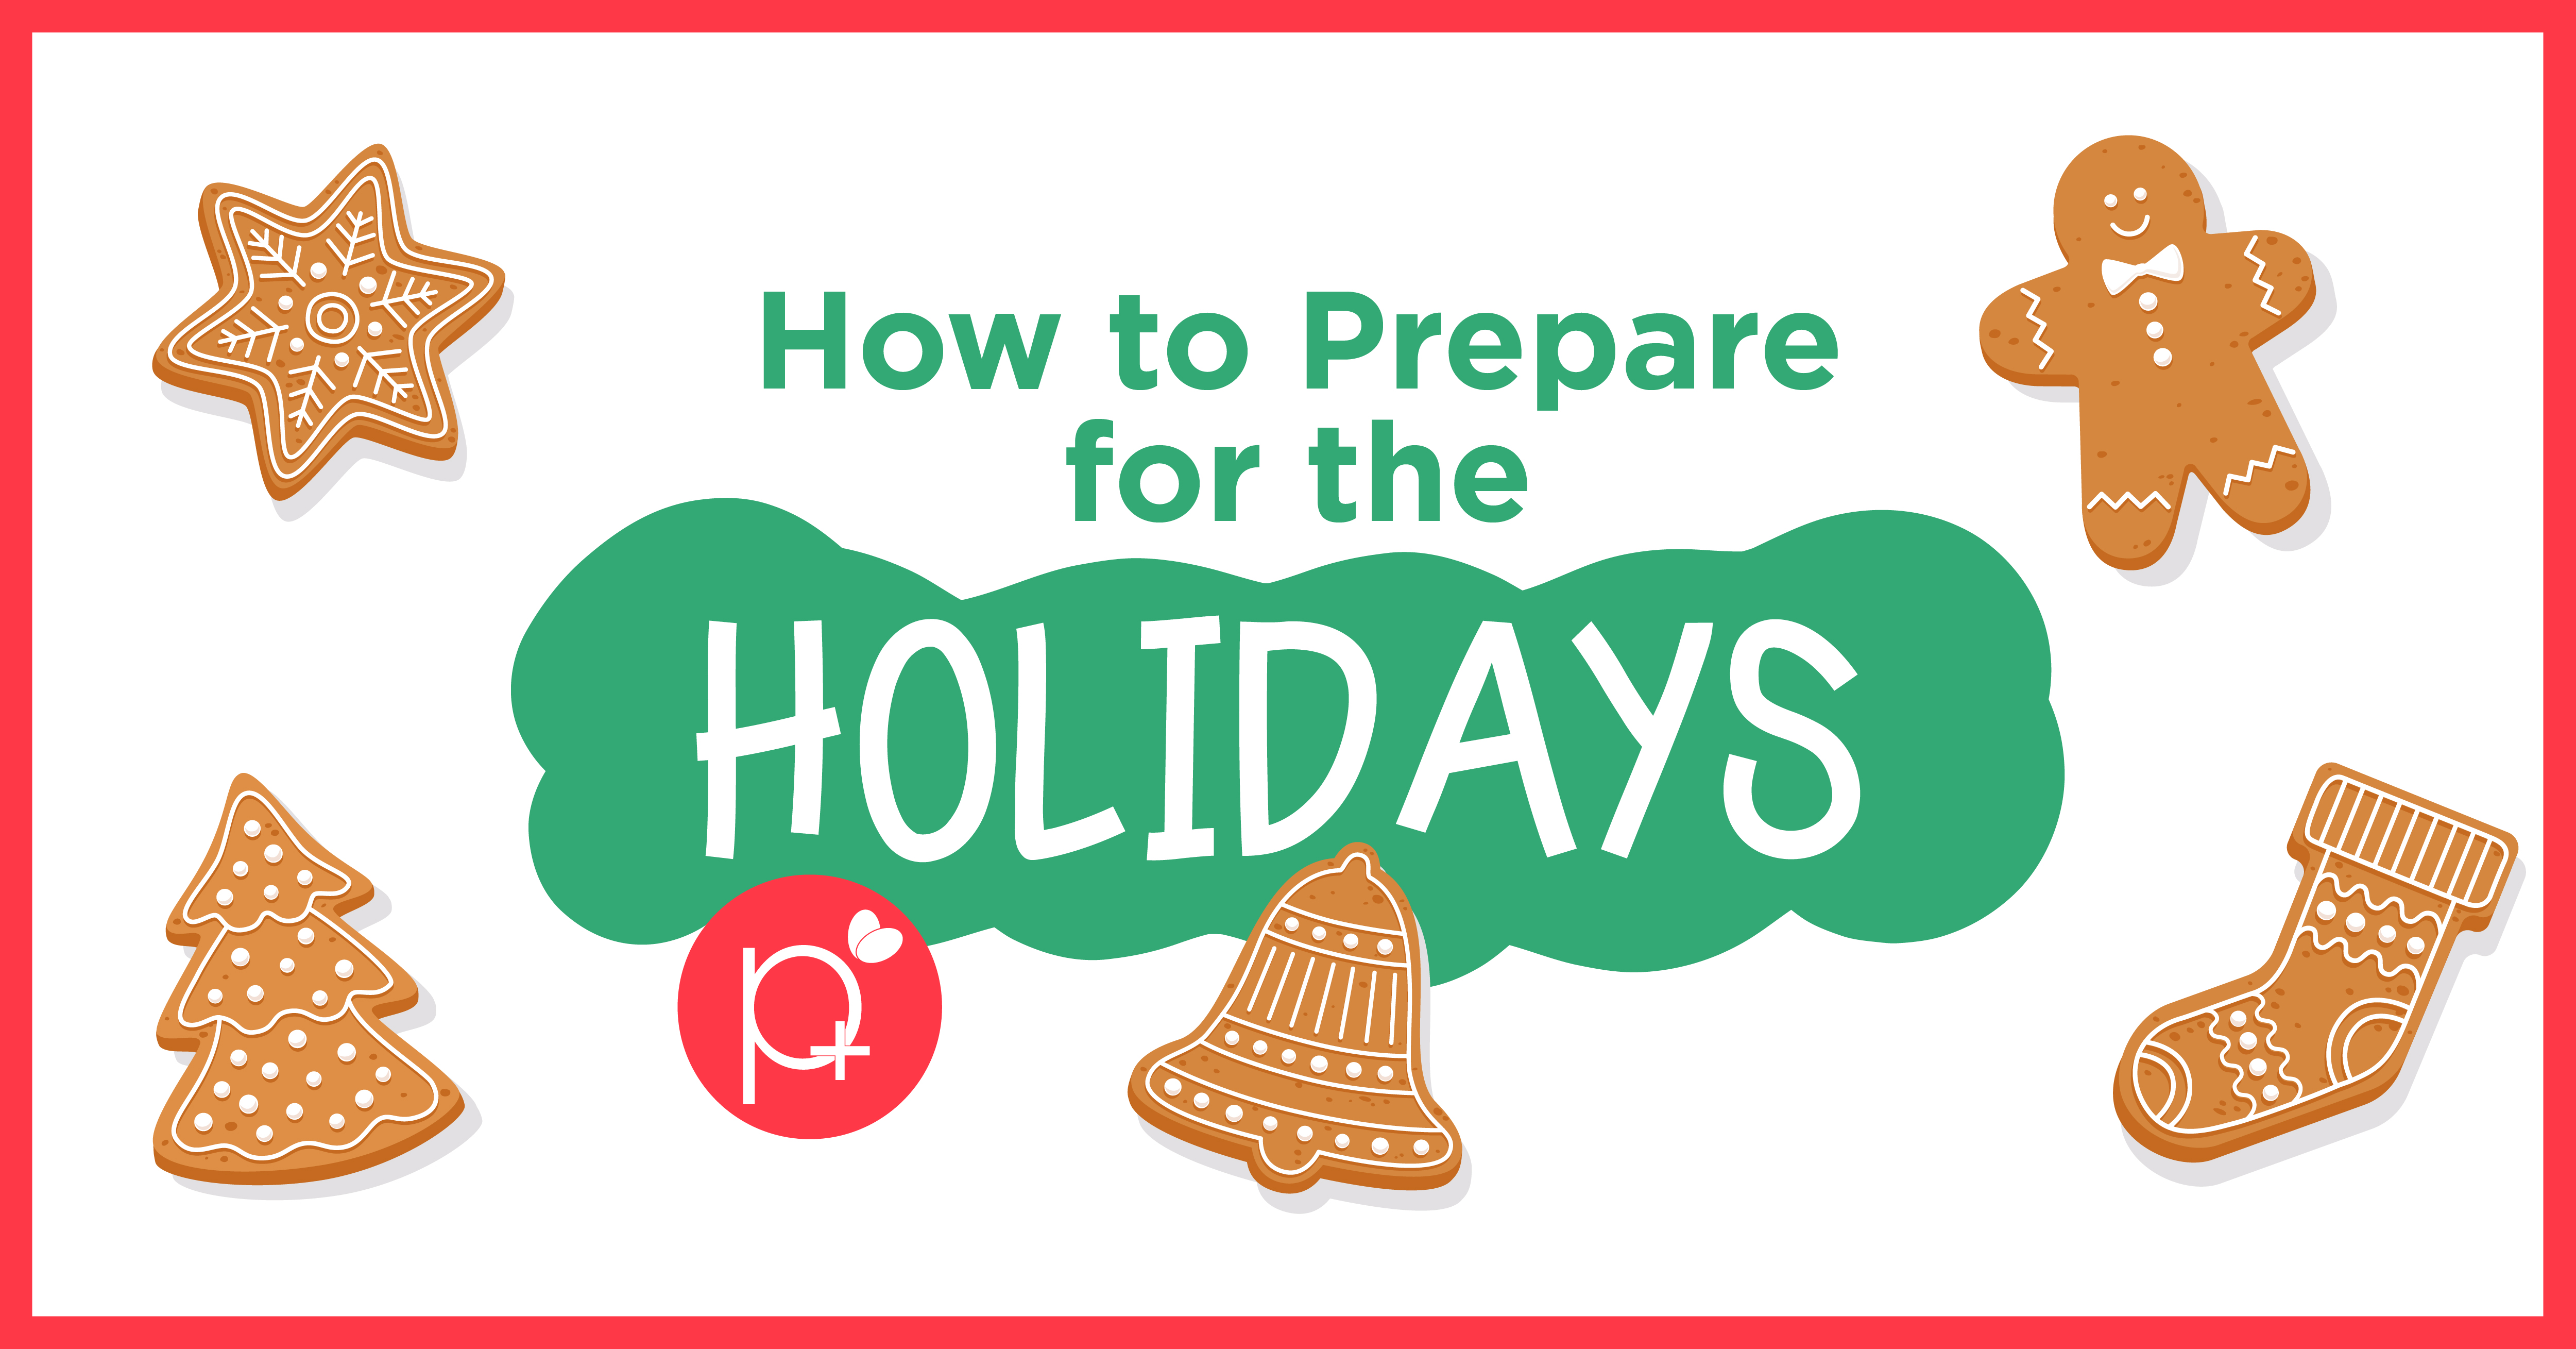 How to Prepare for the Holidays